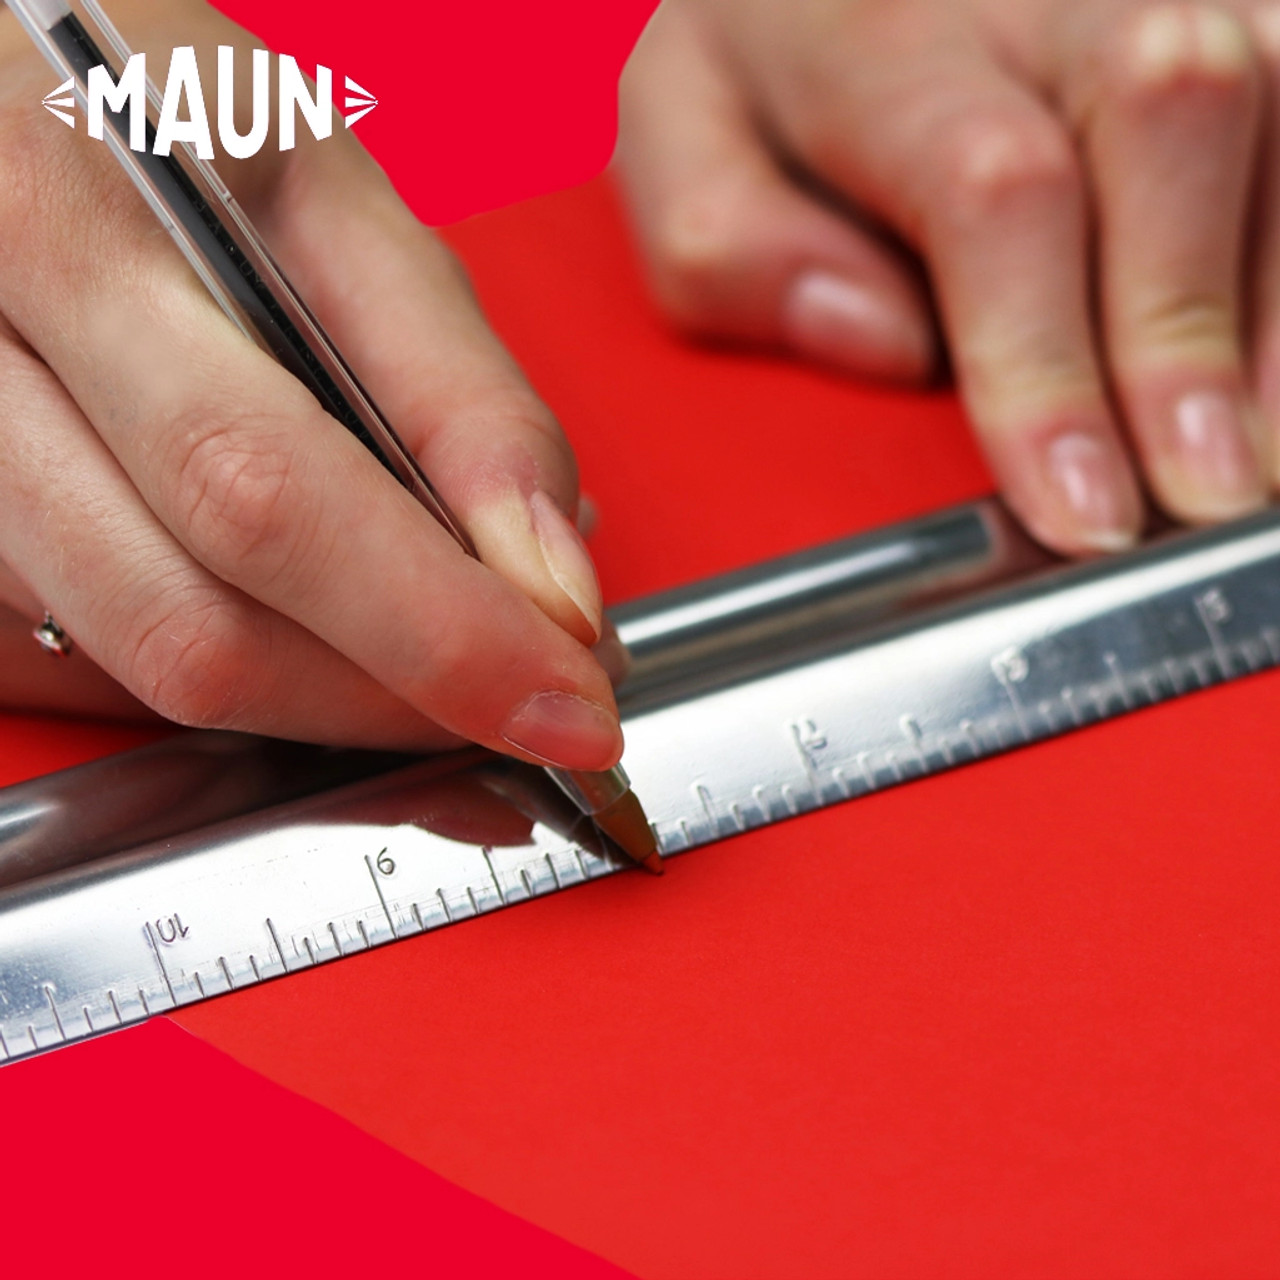 Aluminum Straight Edge Ruler with Handle, It is A Aluminum Ruler, A  Straight Edge ruler and A Centimeter Ruler, Ideal Ruler for Cutting, Much  Safer